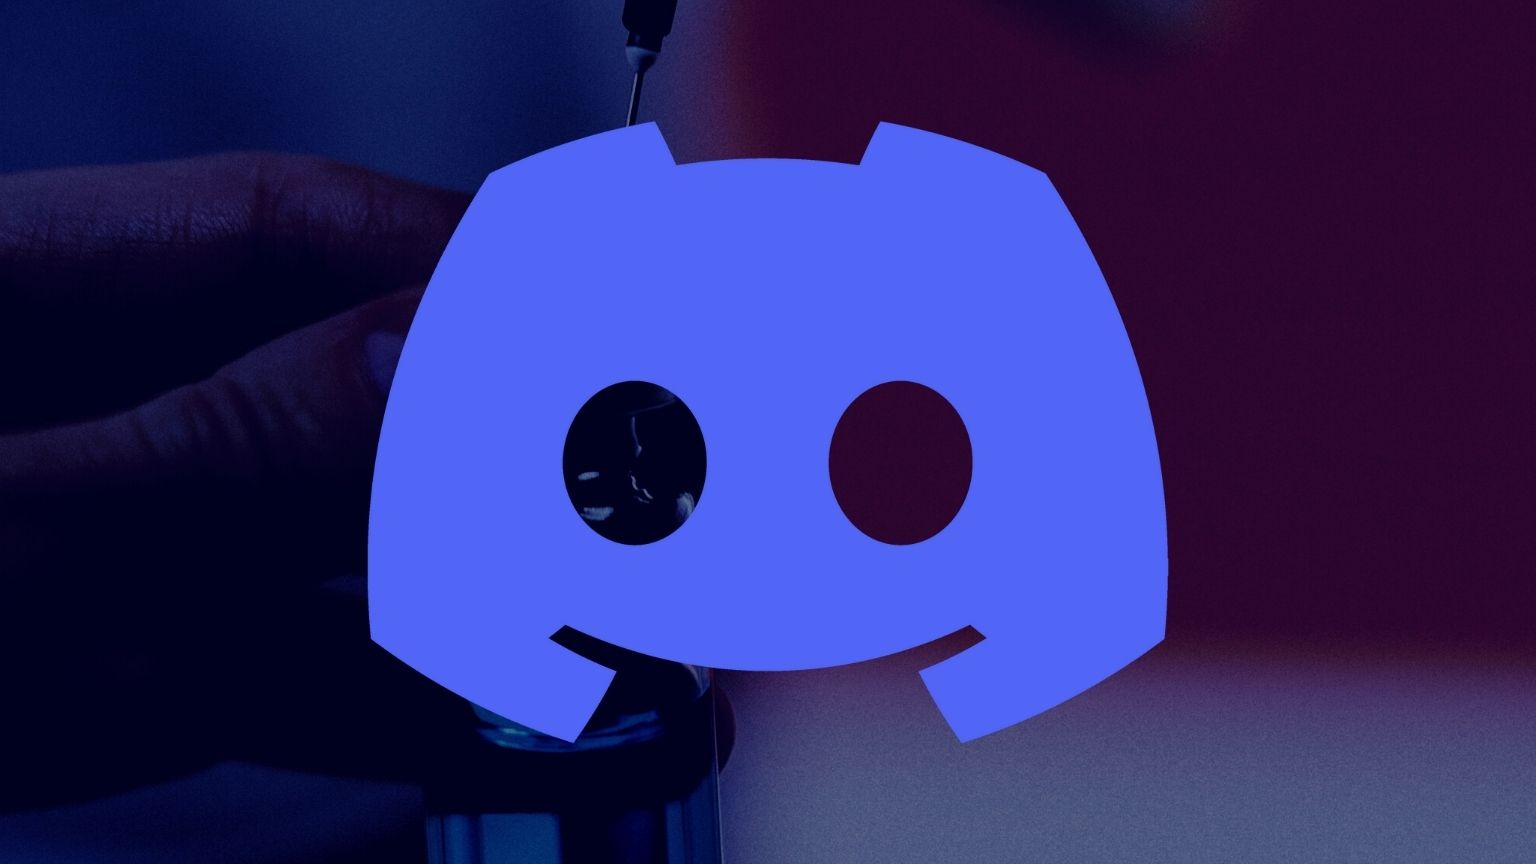 Discord introduces new "anti-misinformation" policy, will ban people for off-platform behavior